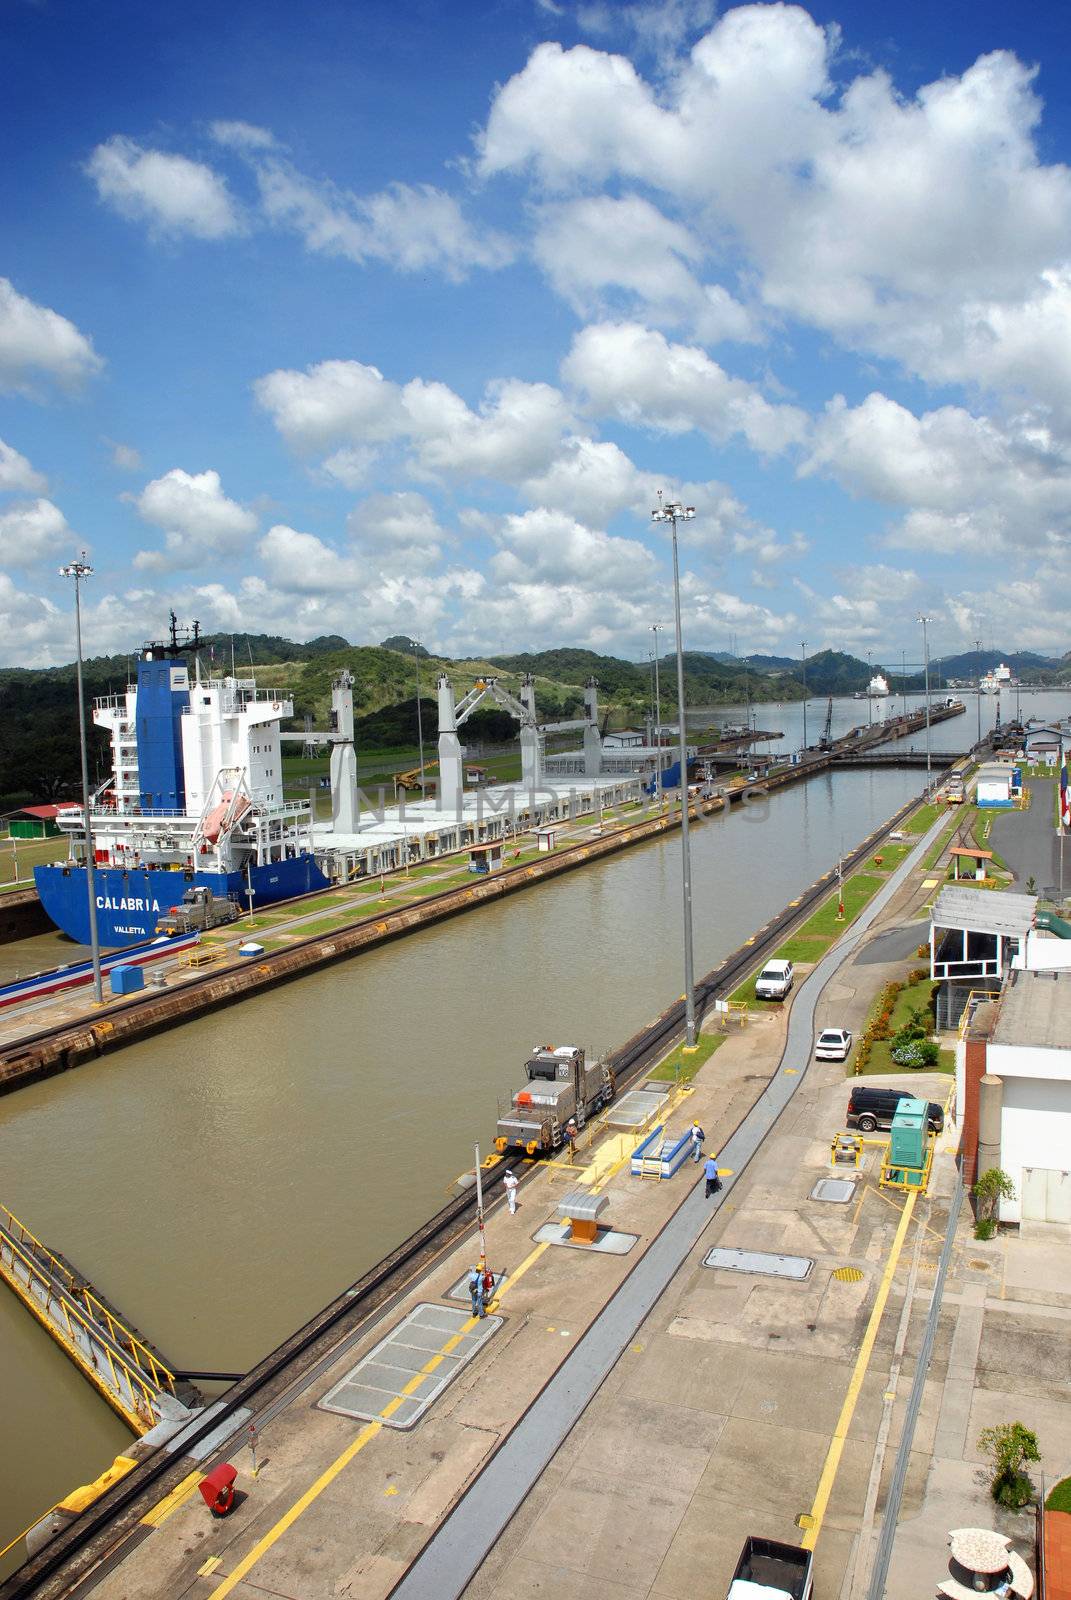 Panama Canal with a large container ship full of cargo in the background.